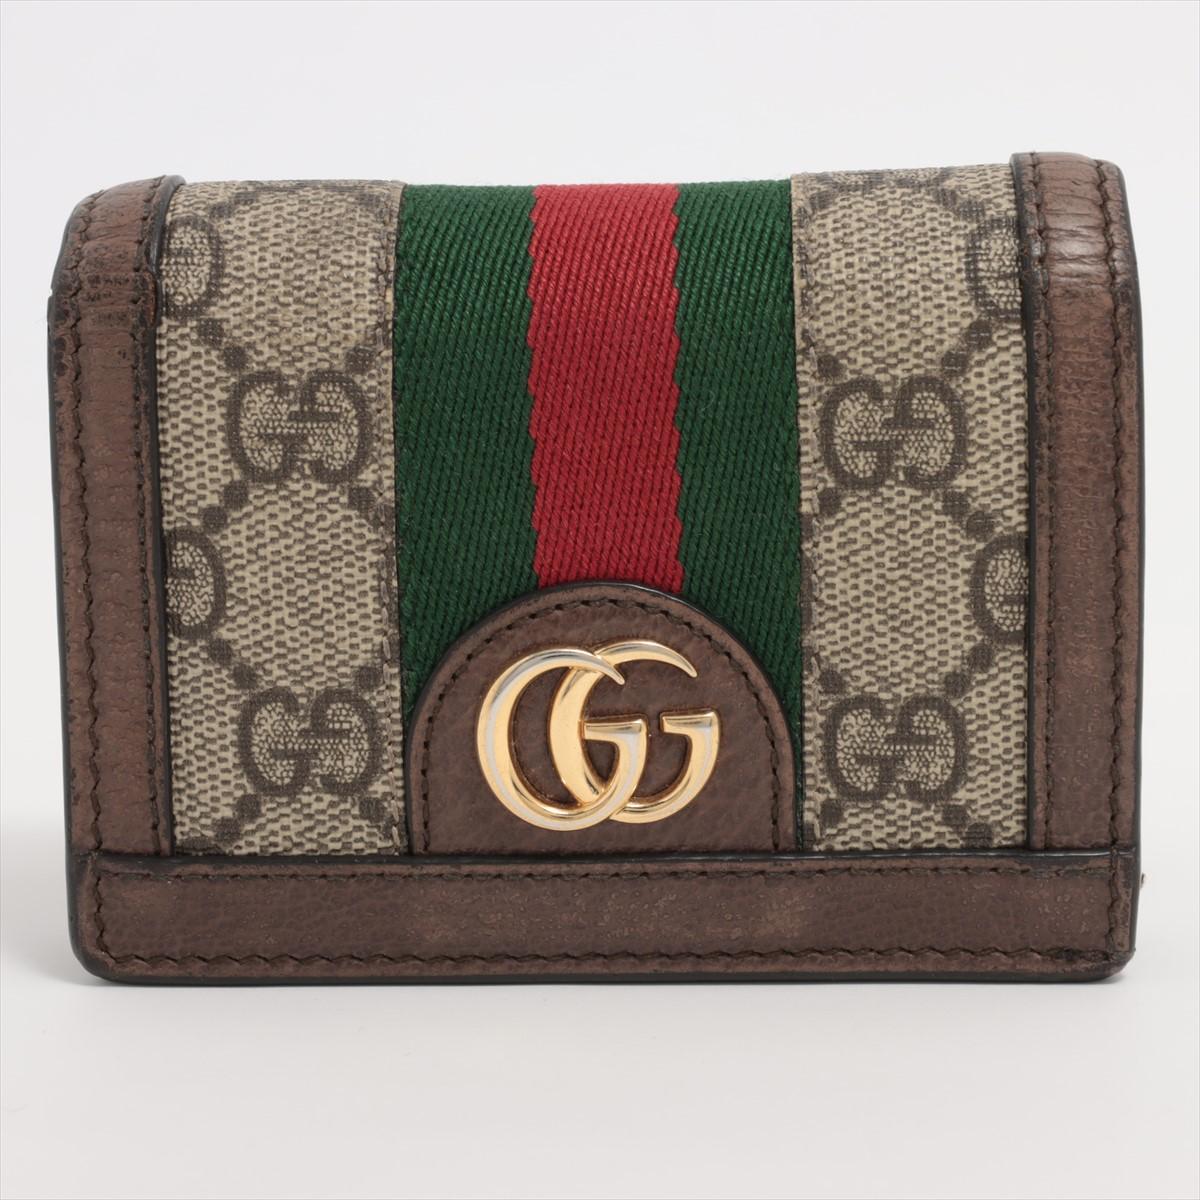 The Gucci GG Supreme Ophidia Card Case Wallet embodies a perfect fusion of timeless elegance and contemporary style. Crafted from the iconic GG Supreme canvas, the monogram pattern exudes sophistication while showcasing the brand's rich heritage.